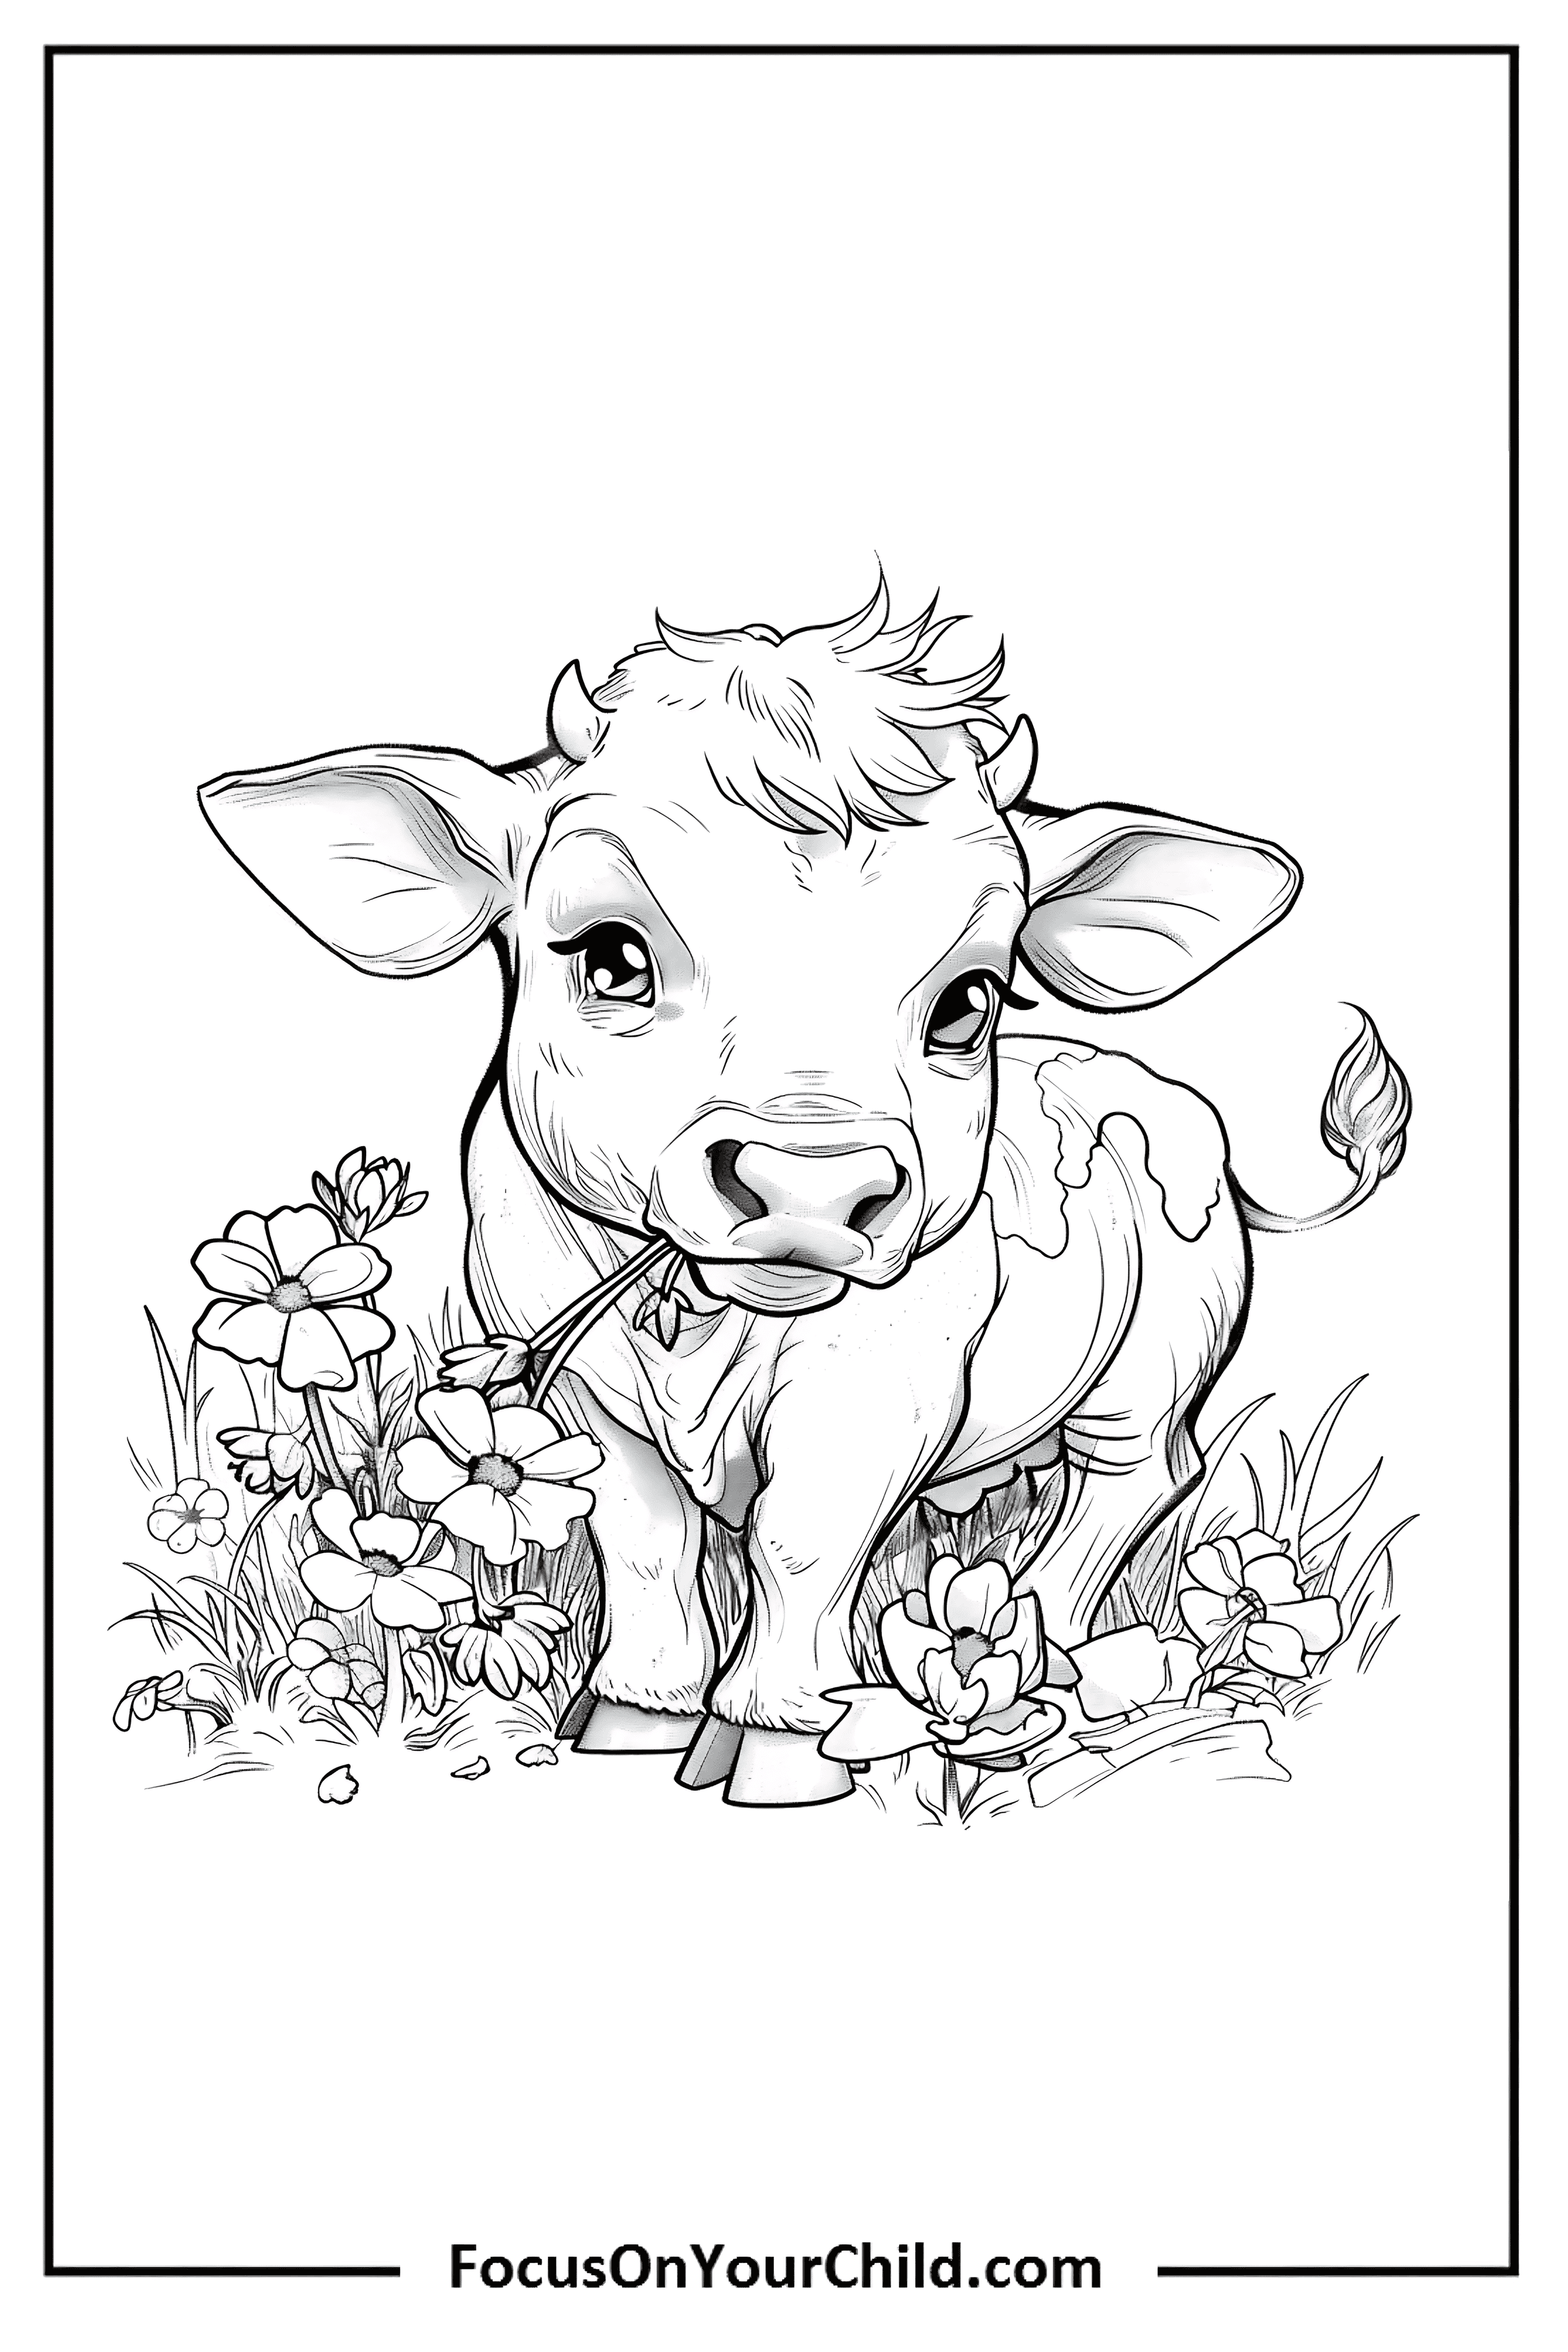 Young calf enjoying a field of wildflowers in charming line drawing.